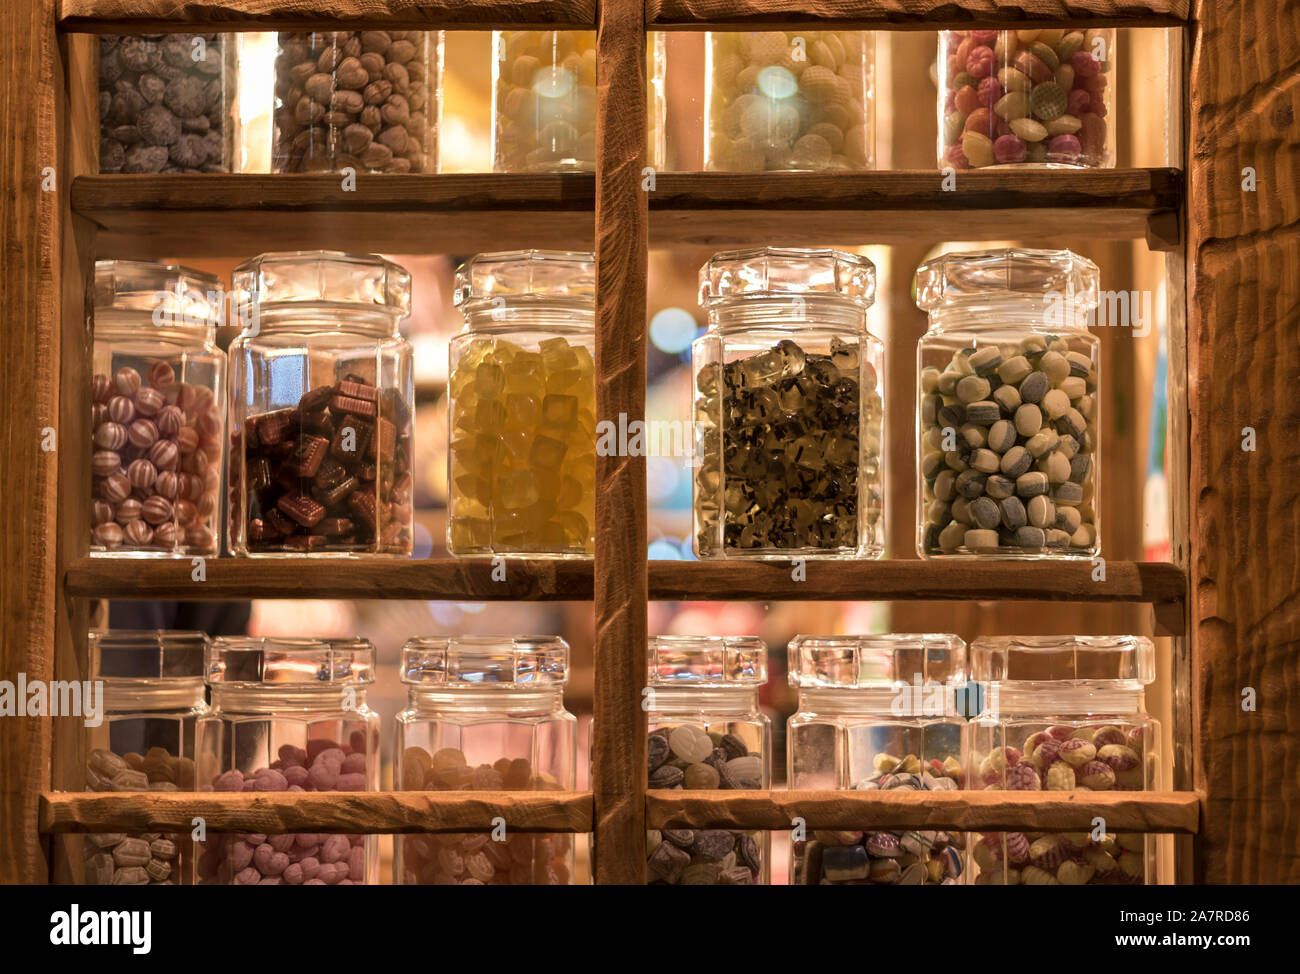 Lots of sweets, in a traditional sweet shop window, at night Stock Photo